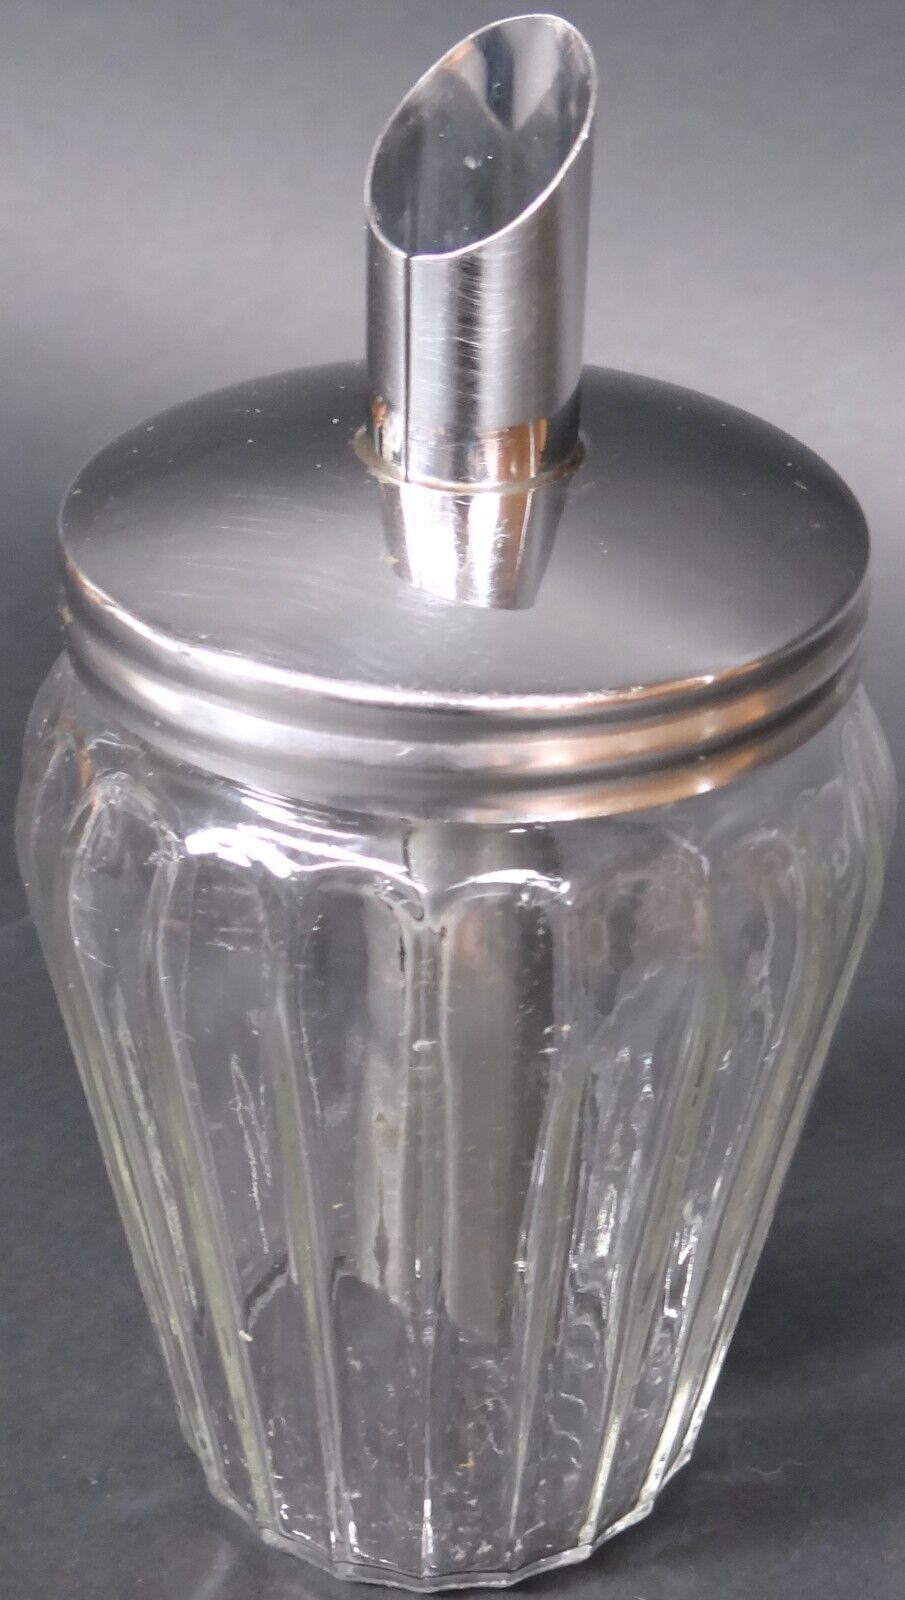 Sugar Shaker Bowl Helly Kelly Glass Rostfrei Stainless Steel Tube Retro Parmesan